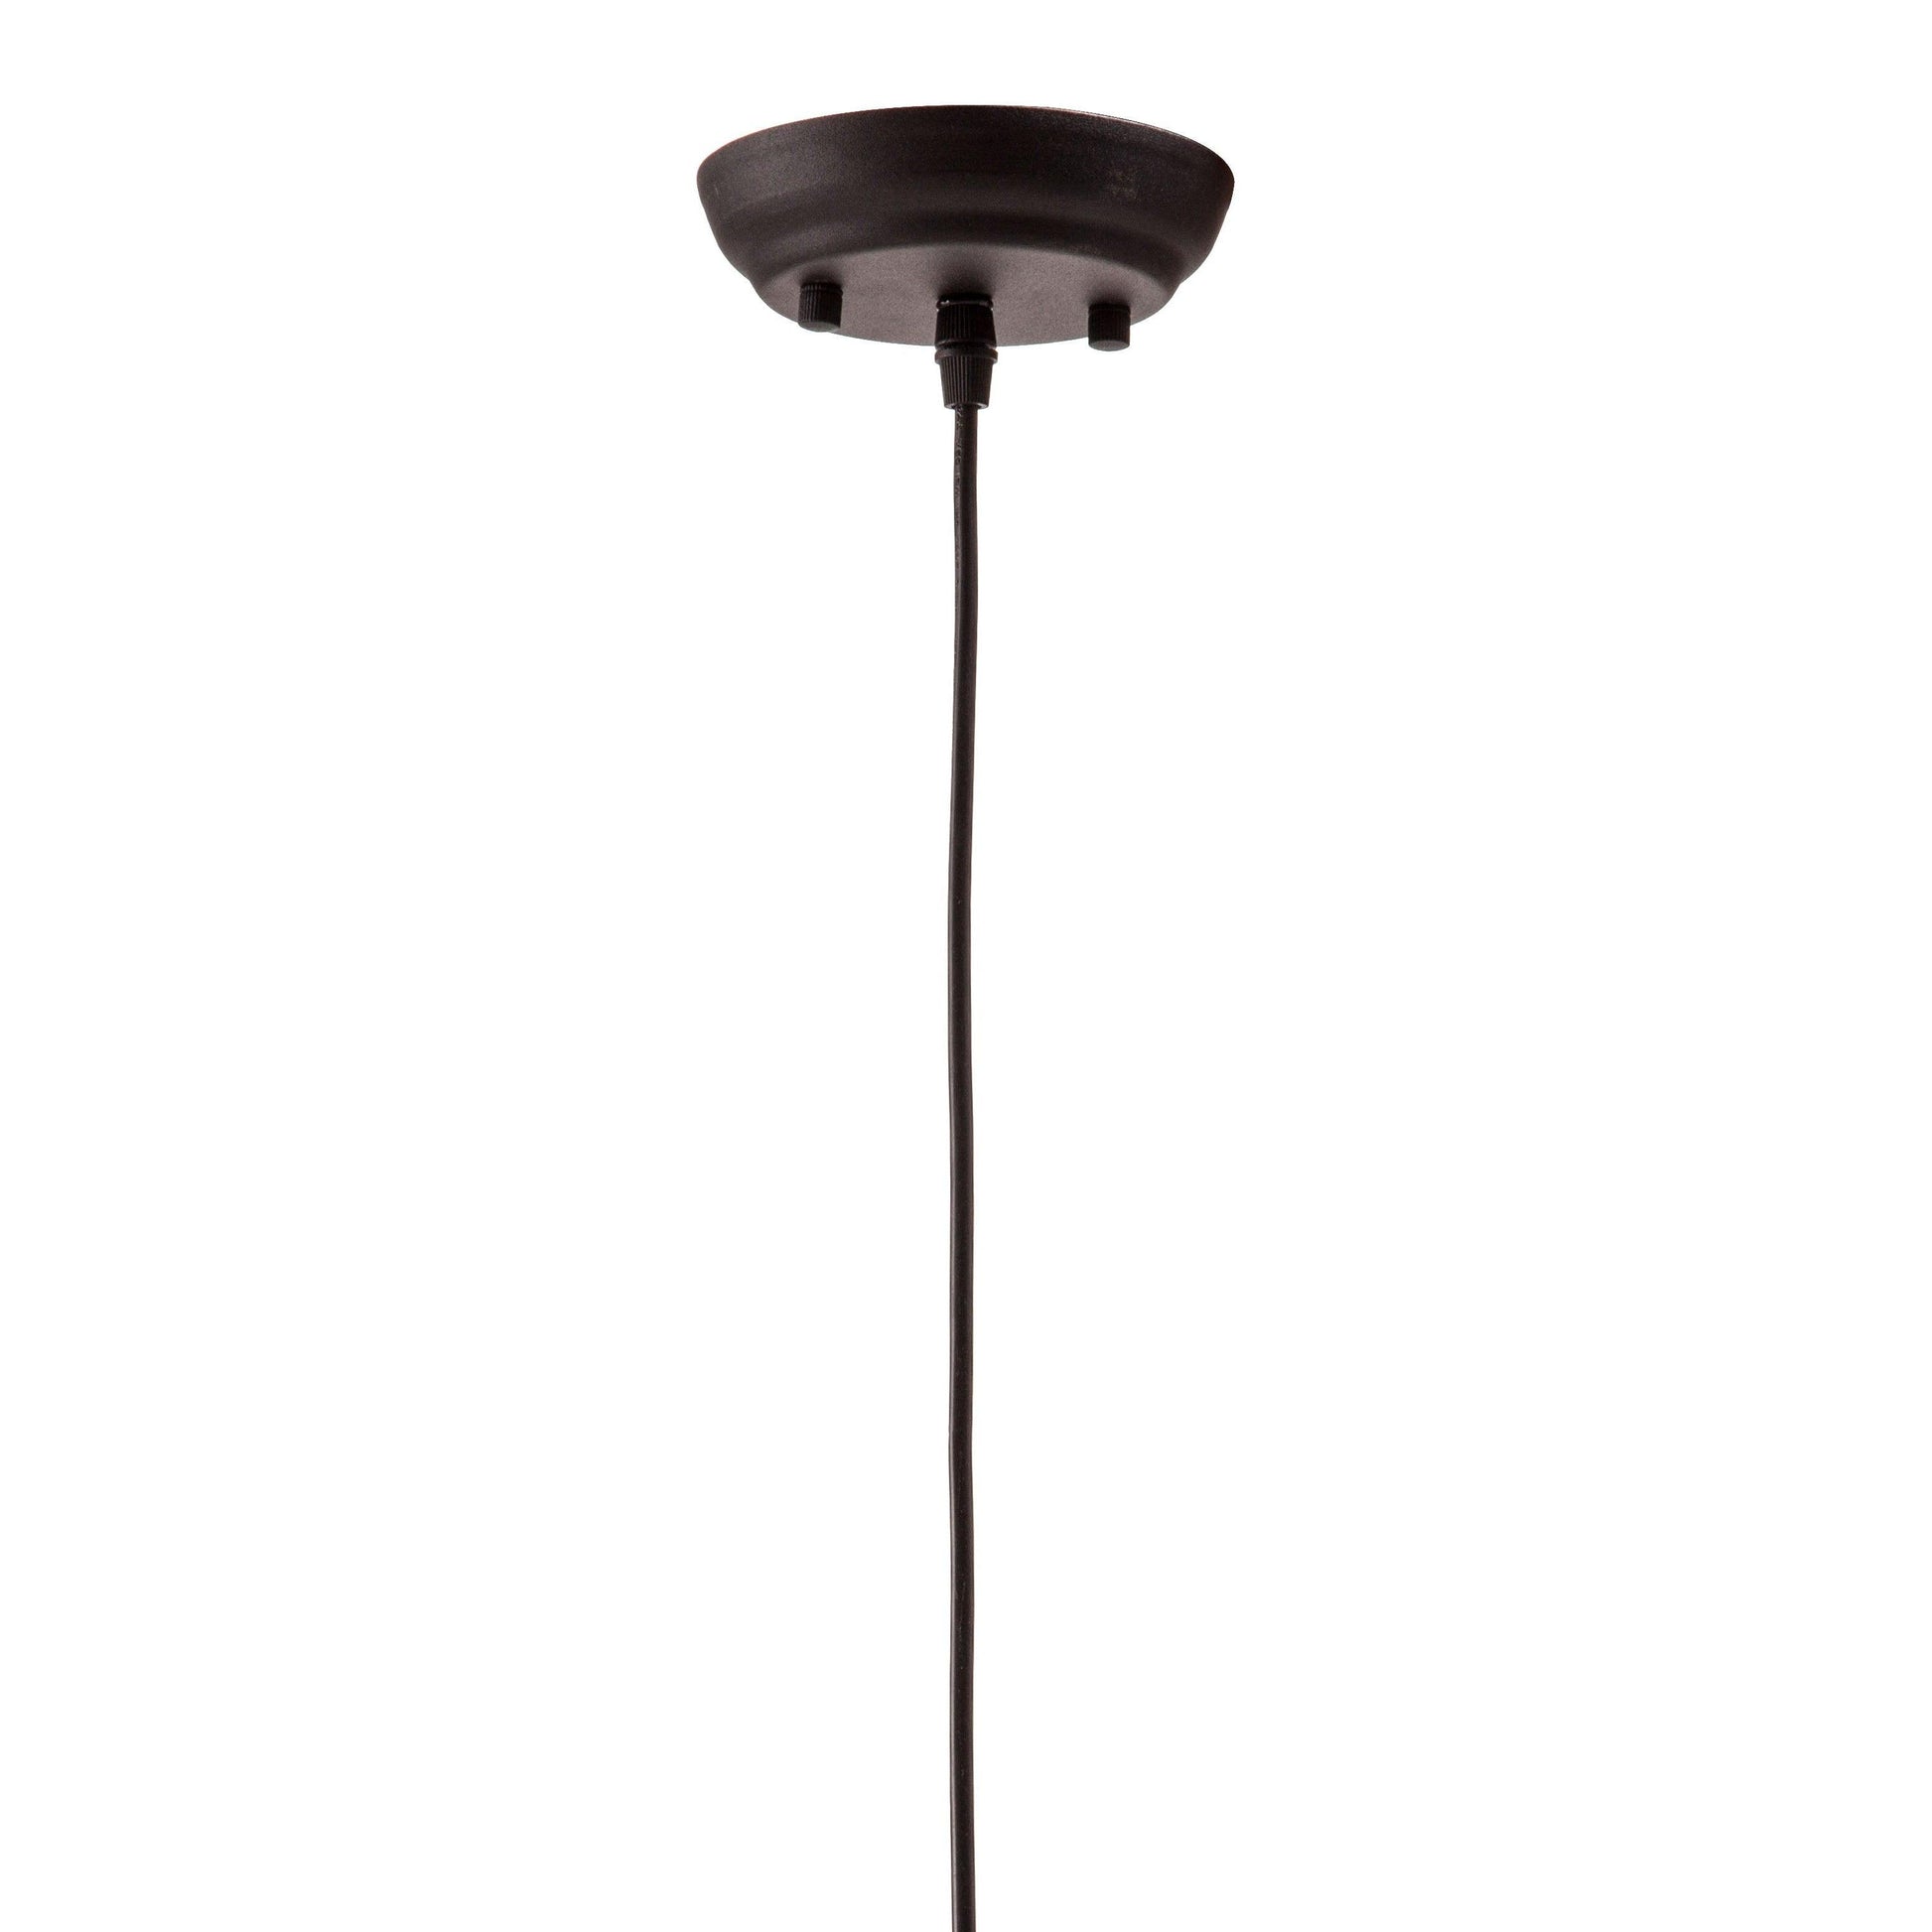 Nezz Ceiling Lamp Natural - Sideboards and Things Brand_Zuo Modern, Color_Natural, Depth_10-20, Features_Adjustable Height, Finish_Powder Coated, Height_10-20, Materials_Metal, Metal Type_Steel, Product Type_Pendant, Width_10-20